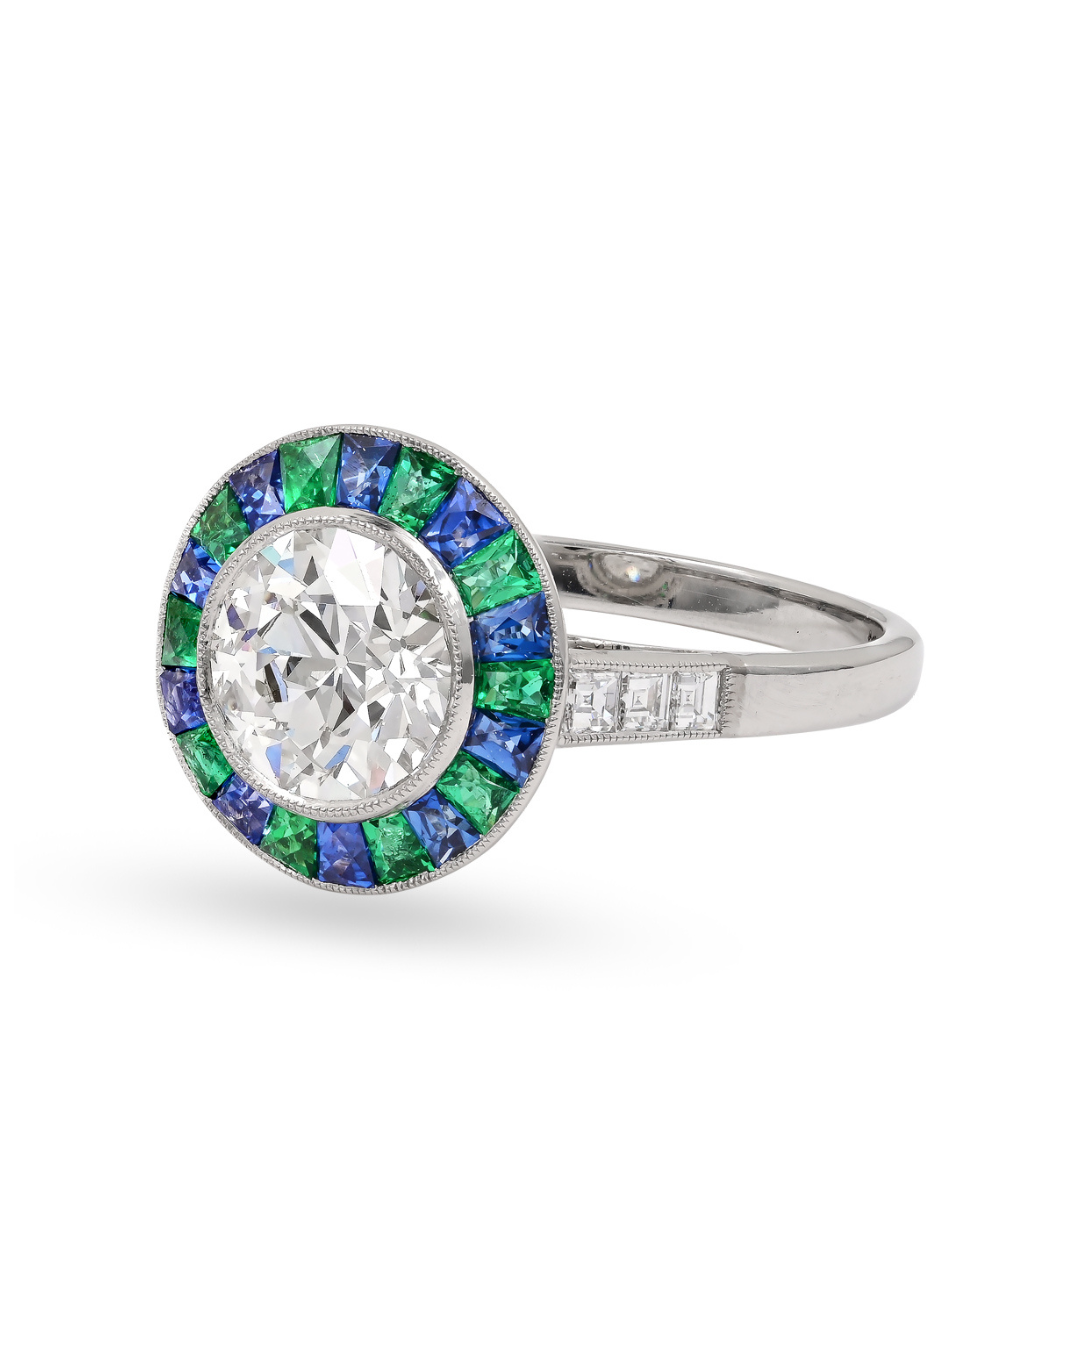 Sophia D. Round Diamond Ring with Alternating French Cut Emeralds and Blue Sapphires